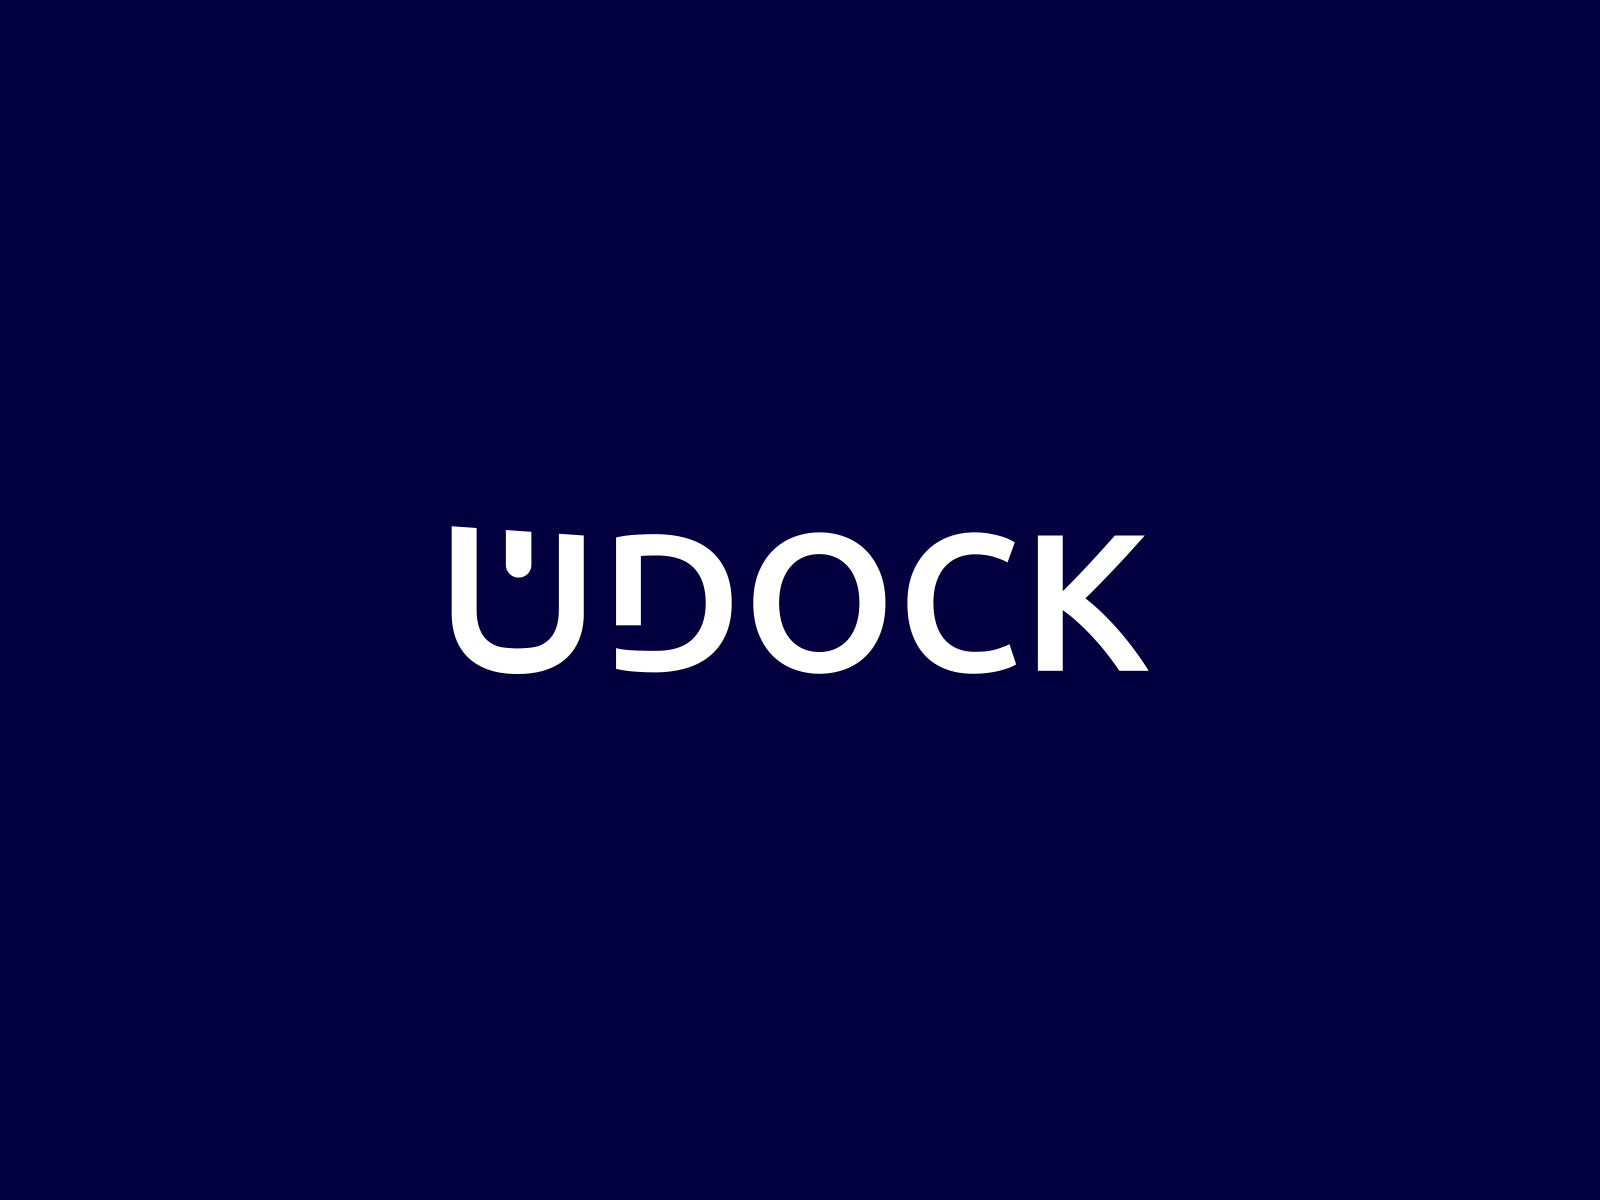 uDock instal the new